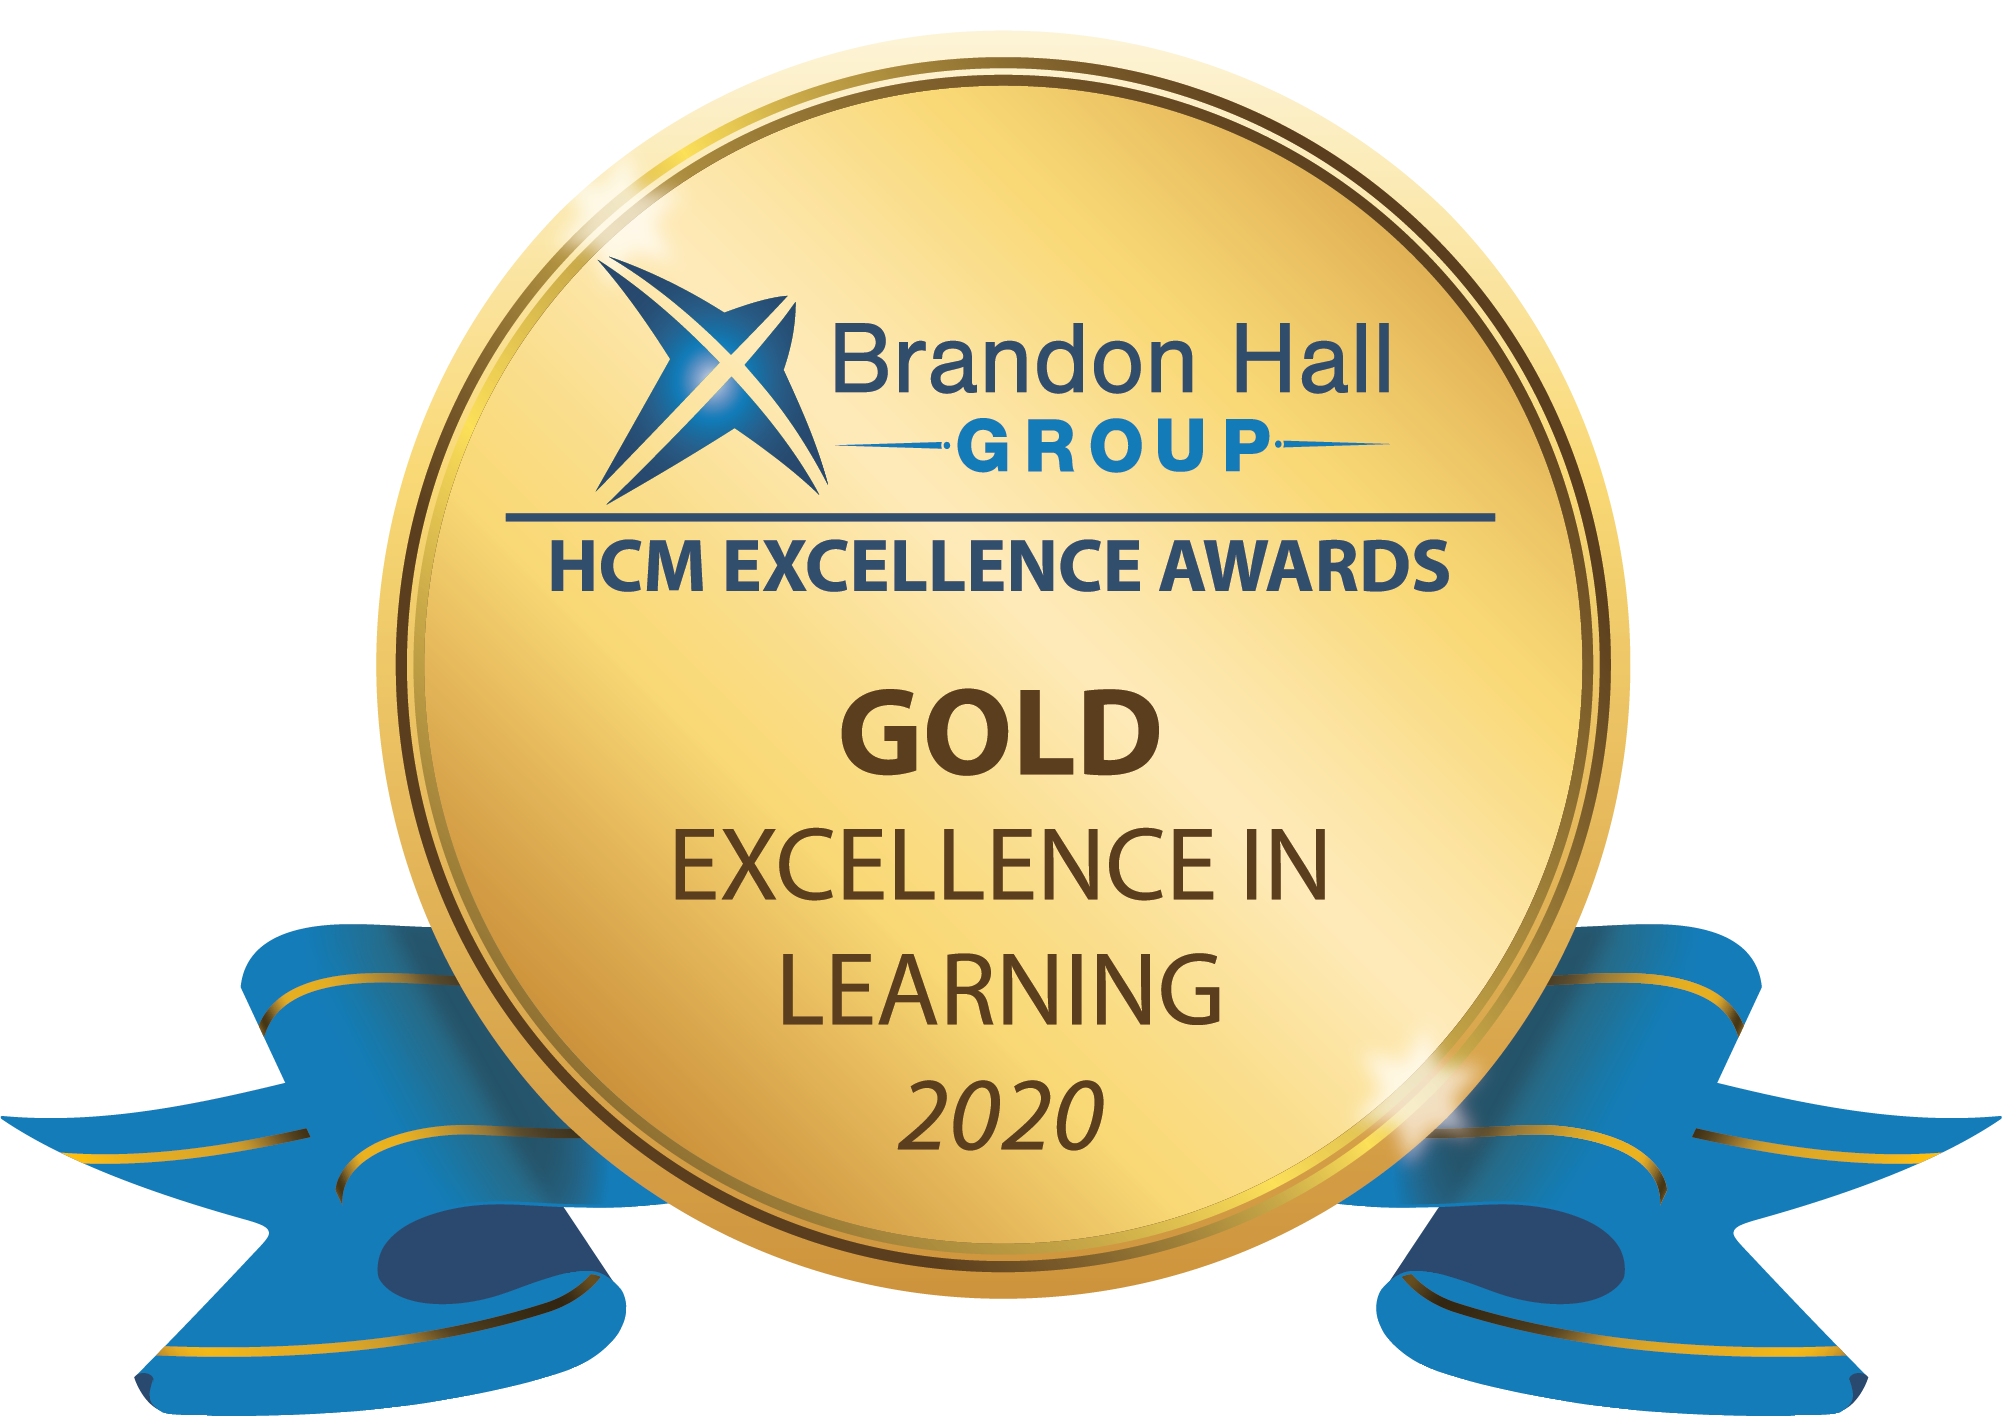 Gold Award medal from Brandon Hall Group HCM Excellence Awards